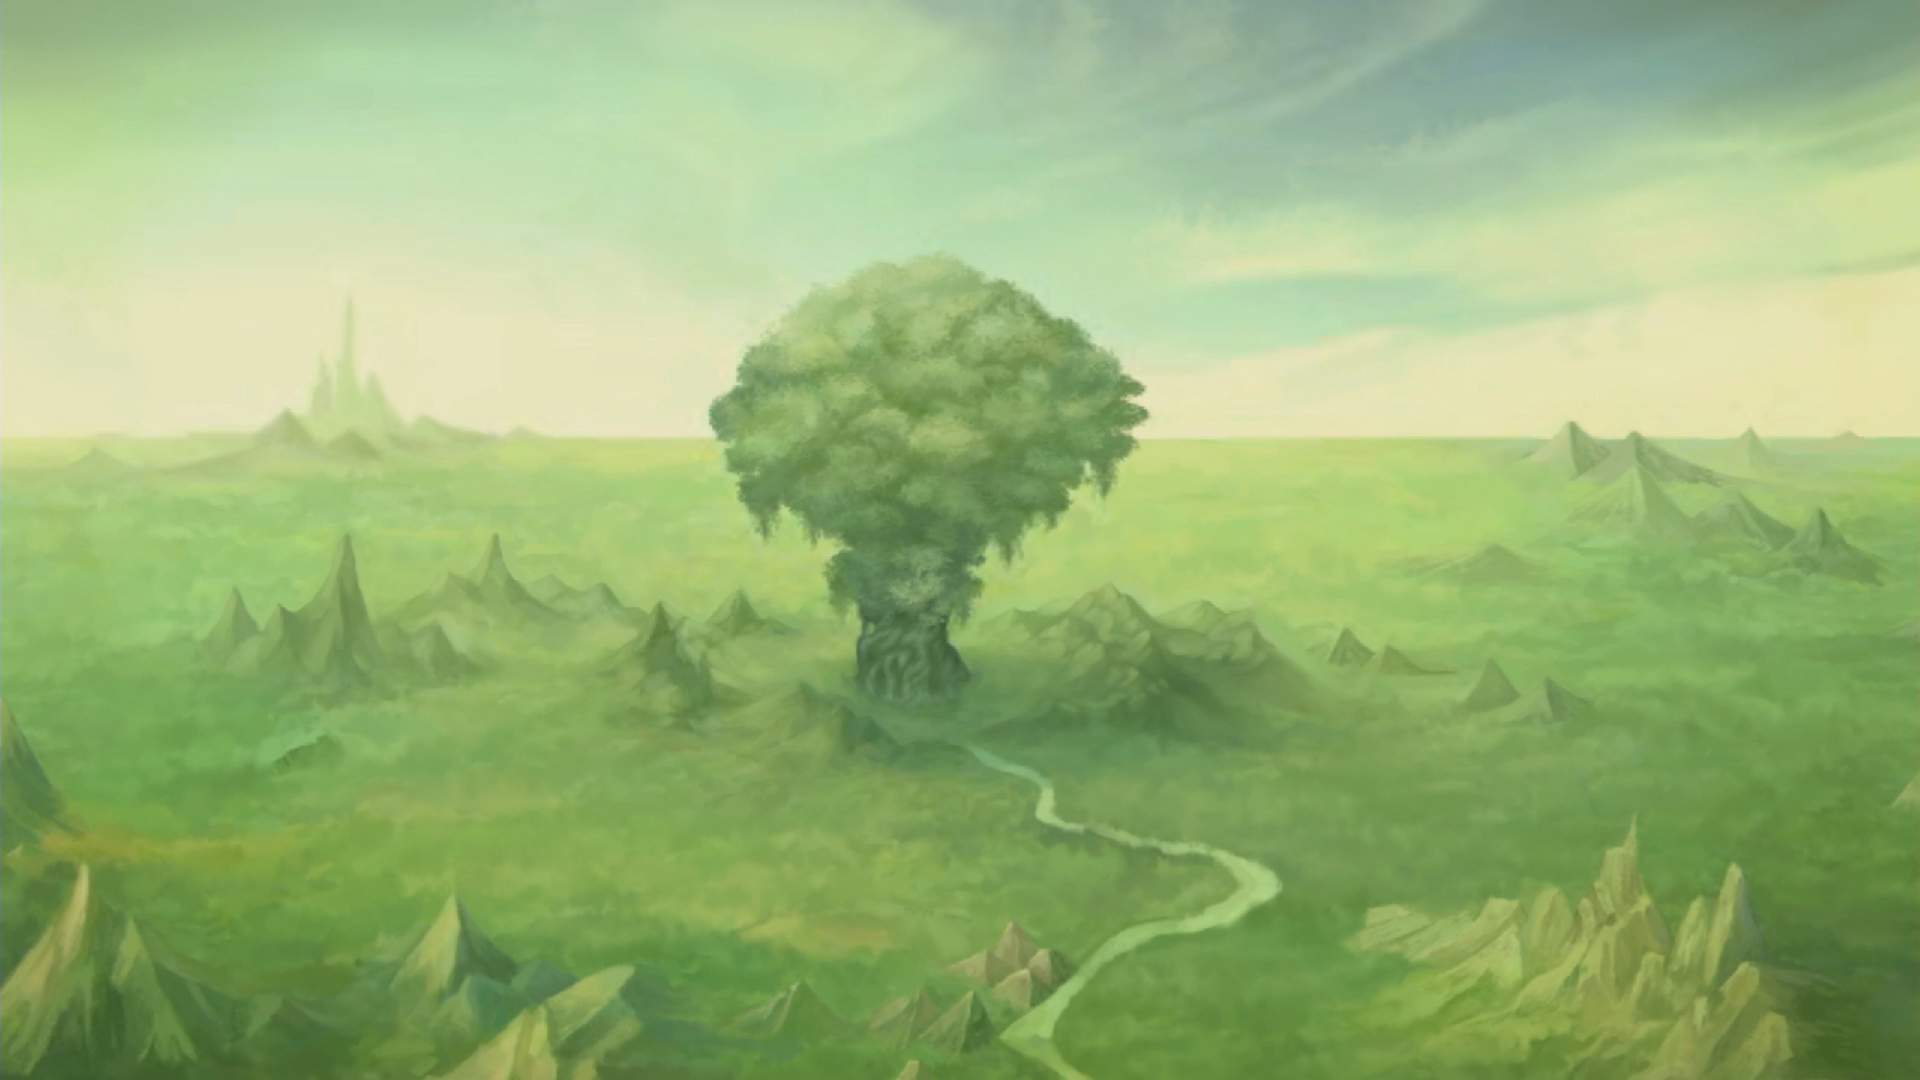 A far shot showing the Mana Tree in the centre of a green landscape.